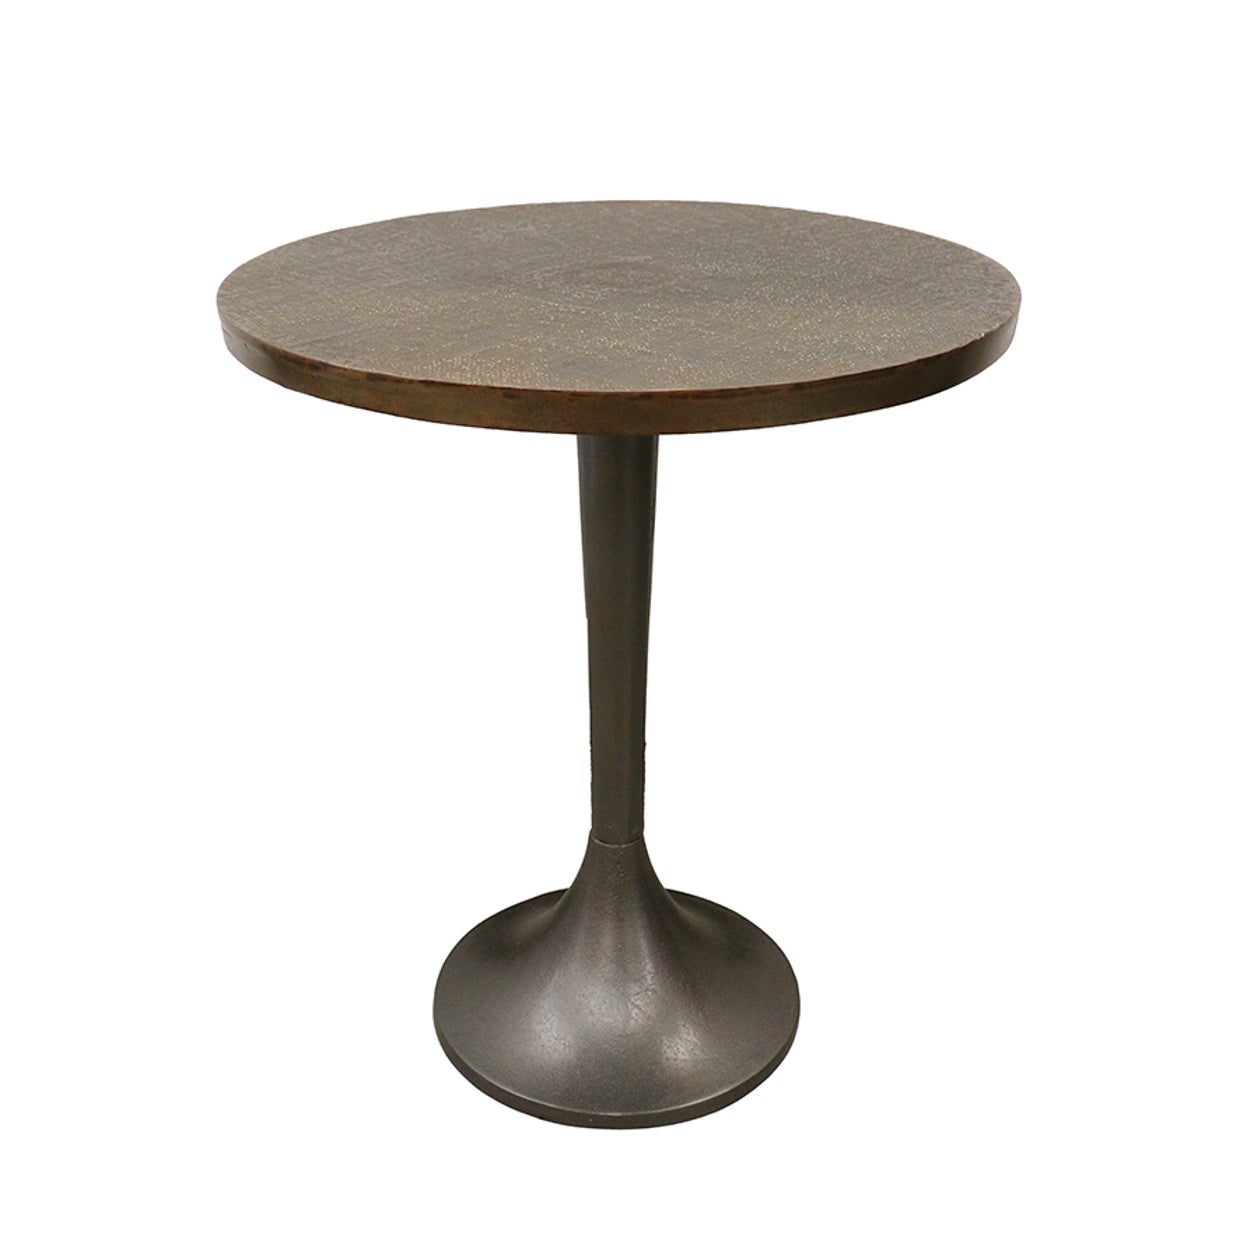 Casablanca Tulip Table in Antique Brass Finish with Bronze Finish Base